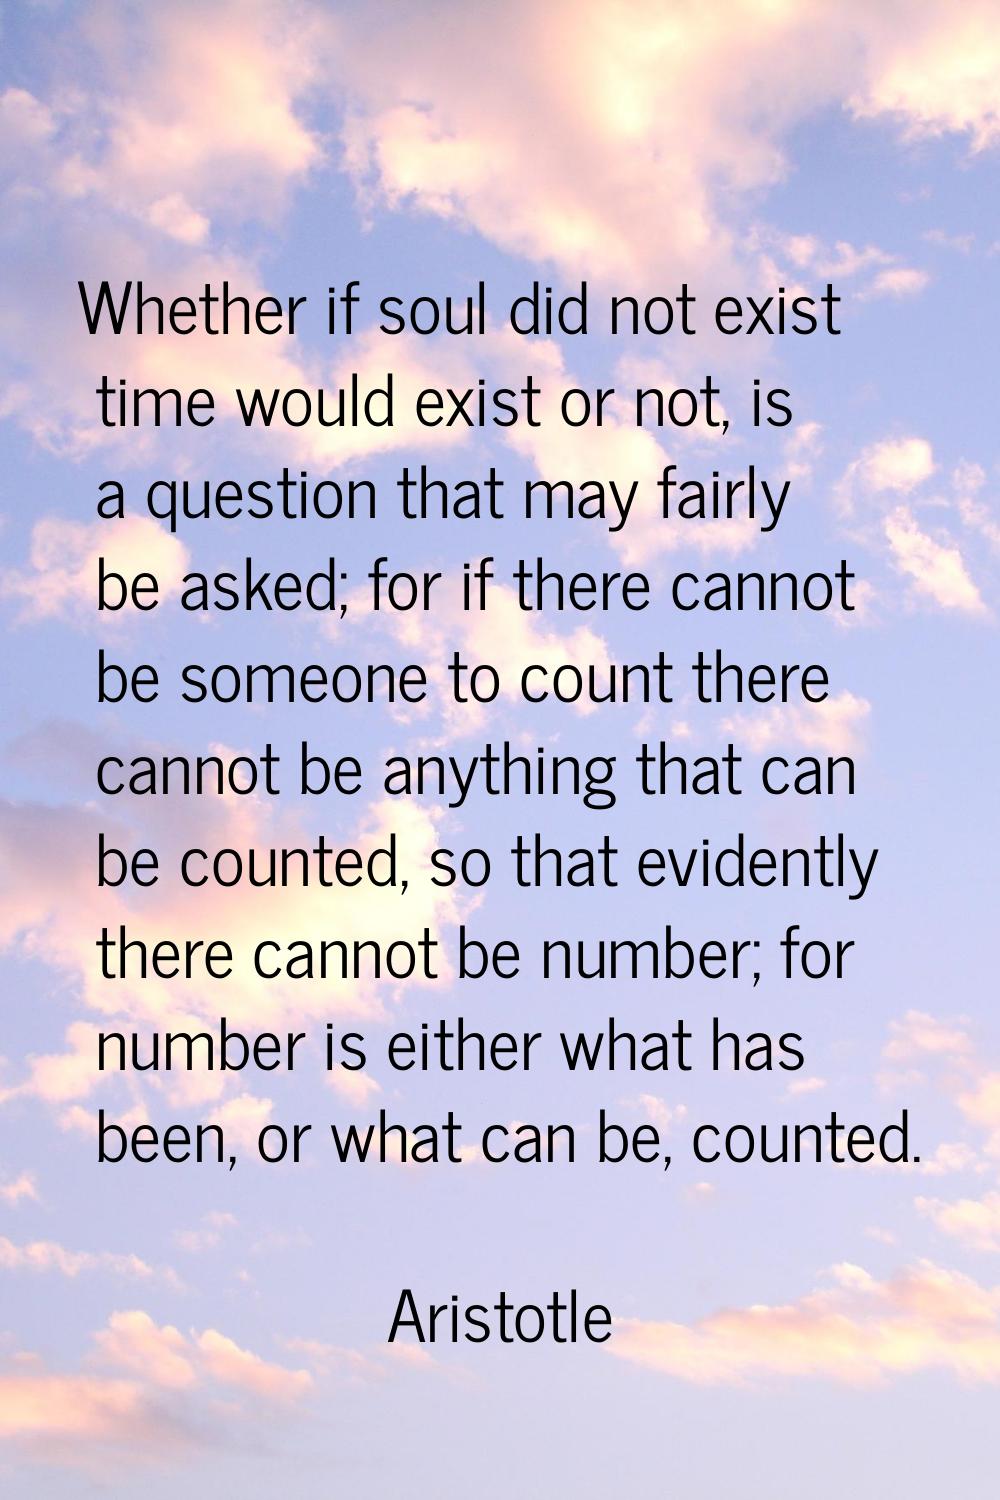 Whether if soul did not exist time would exist or not, is a question that may fairly be asked; for 